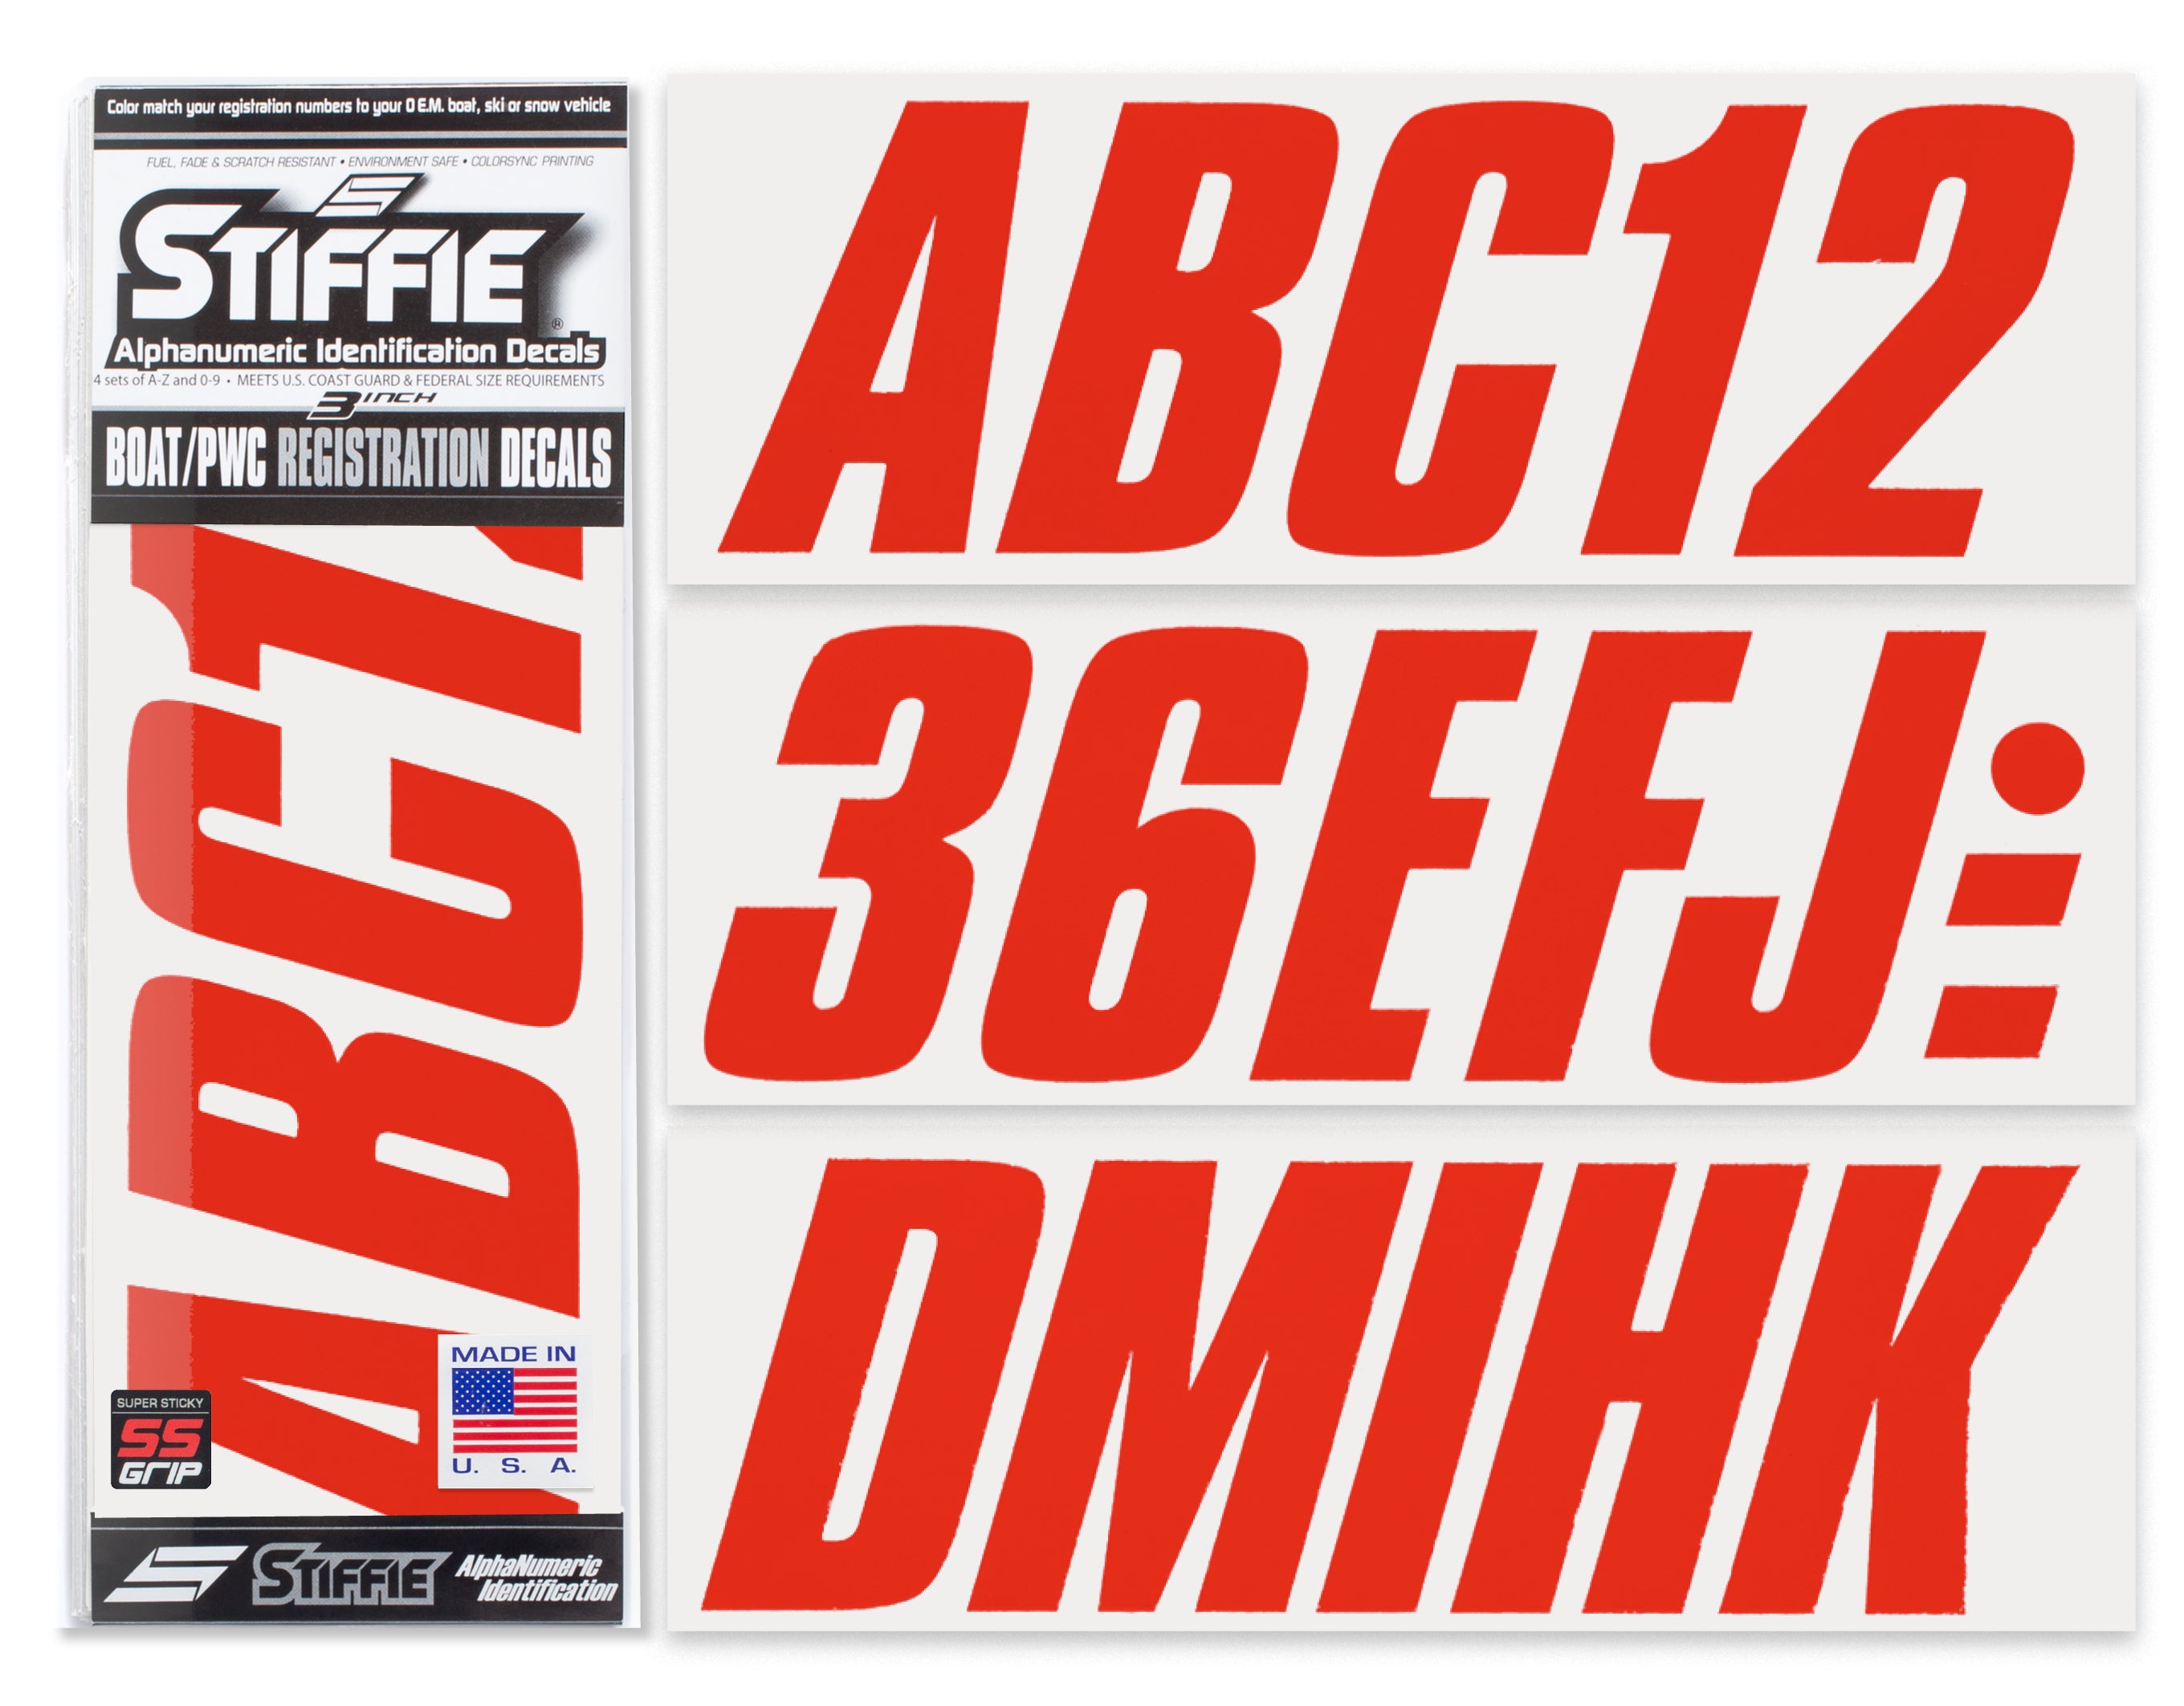 STIFFIE Shift Lava Red Super Sticky 3" Alpha Numeric Registration Identification Numbers Stickers Decals for Sea-Doo Spark, Inflatable Boats, Ribs, Hypalon/PVC, PWC and Boats.